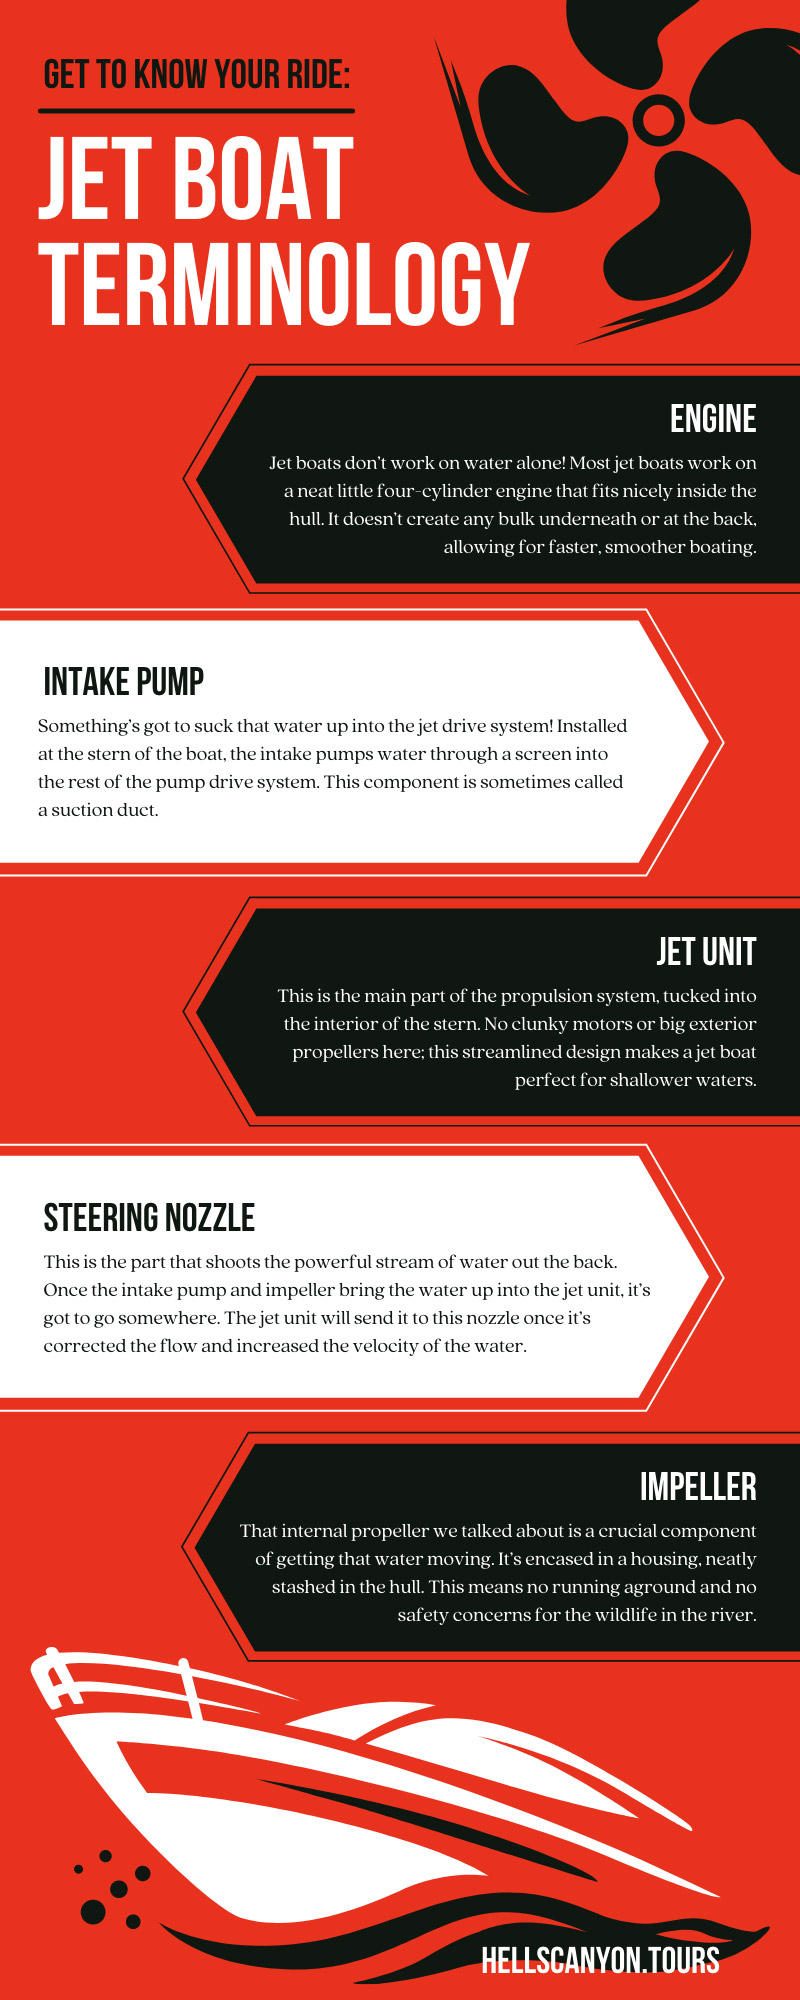 Get To Know Your Ride: Jet Boat Terminology